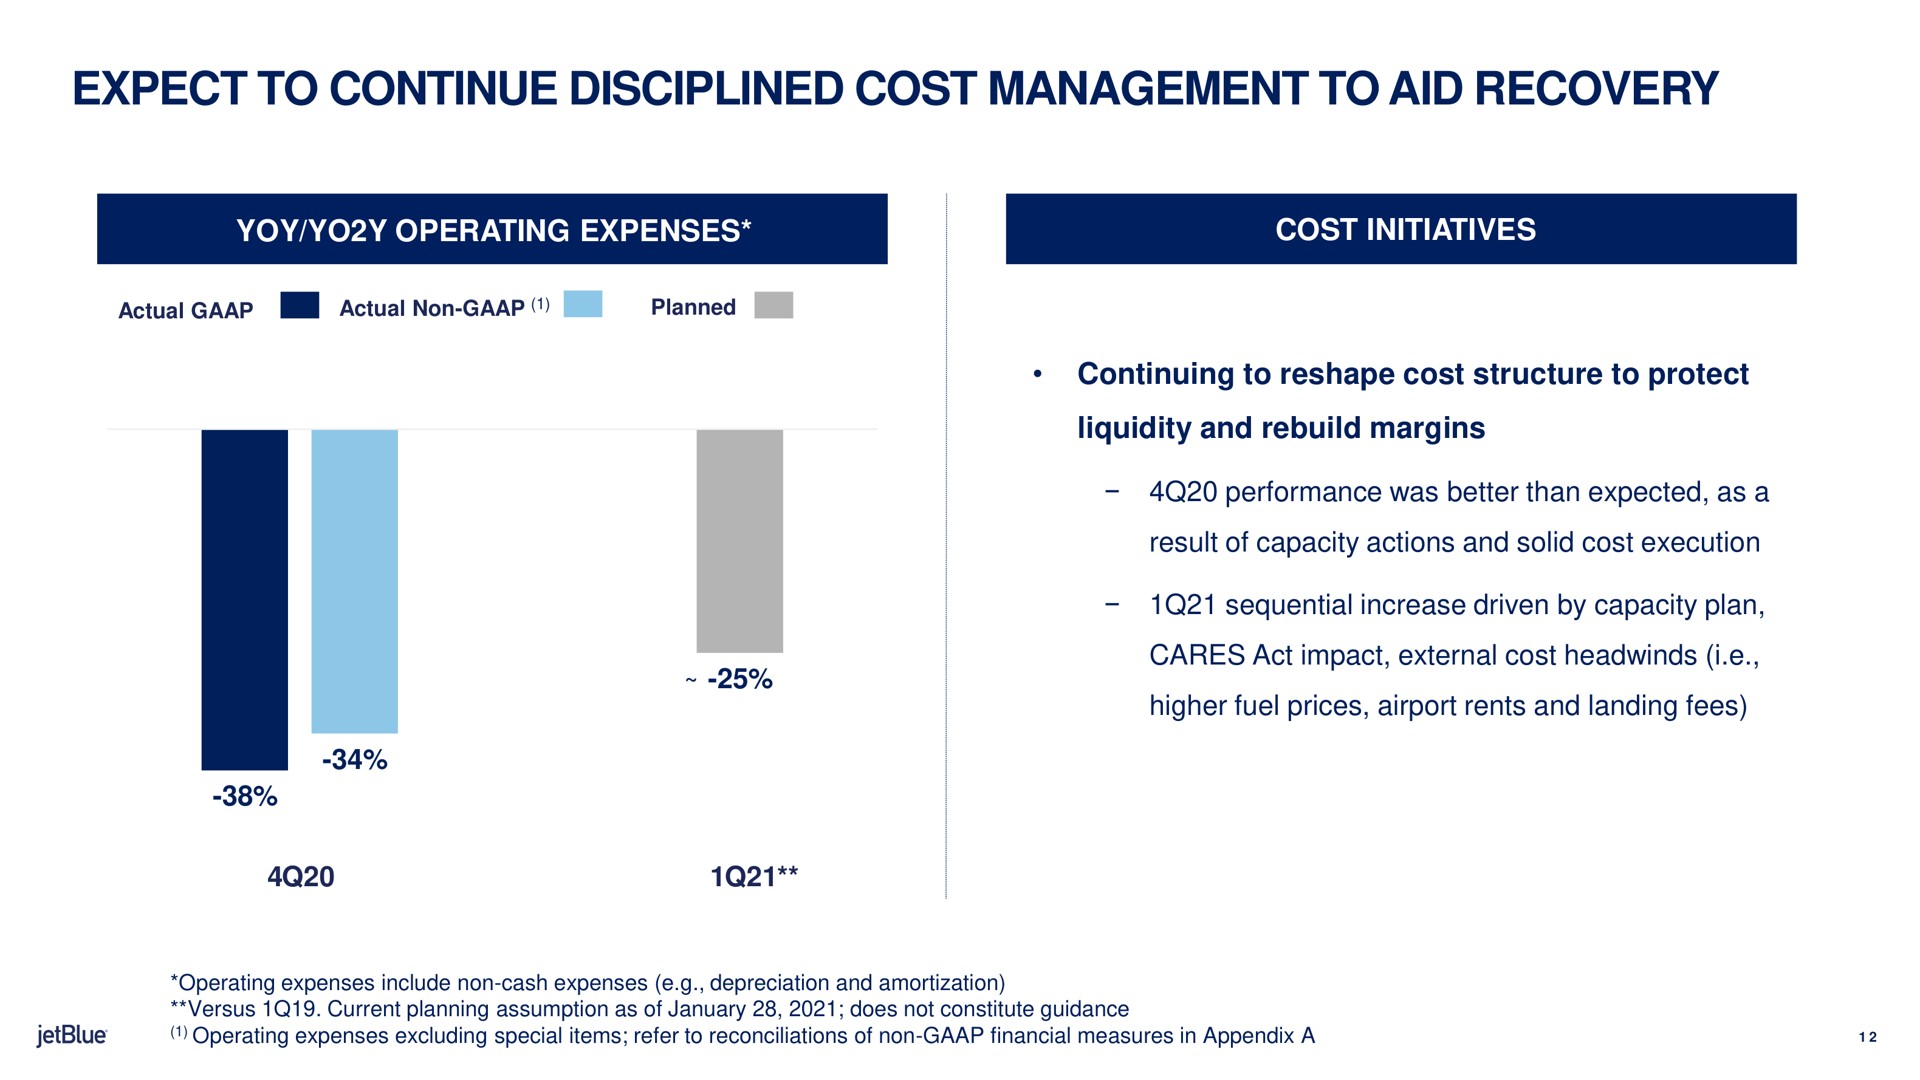 expect to continue disciplined cost management to aid recovery yoy operating expenses cost initiatives continuing to reshape cost structure to protect liquidity and rebuild margins | jetBlue